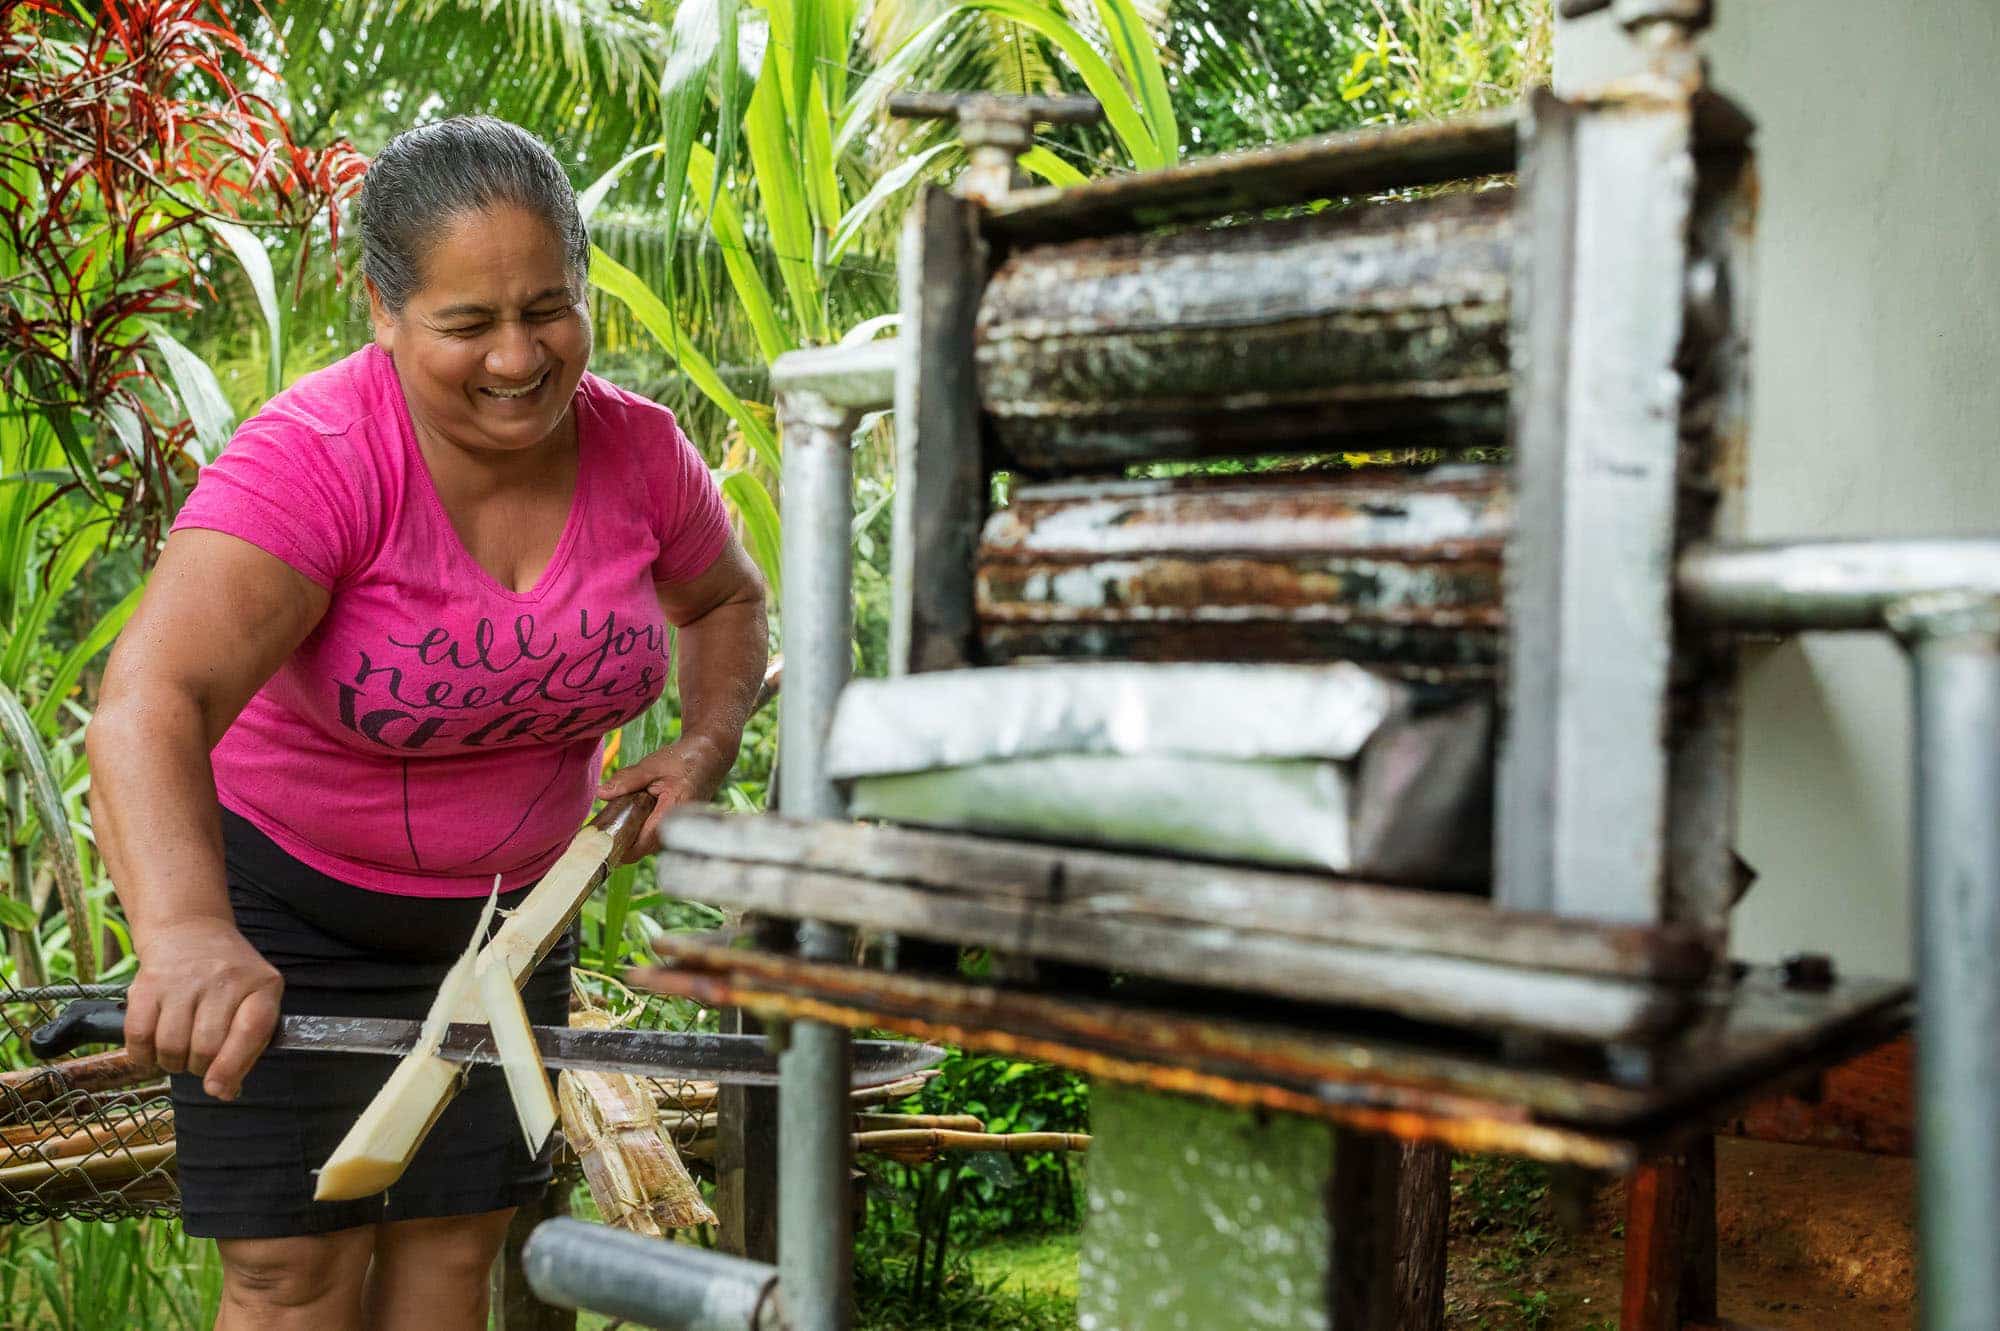 Costa Rican woman cutting the sugar can in preparation for pressing